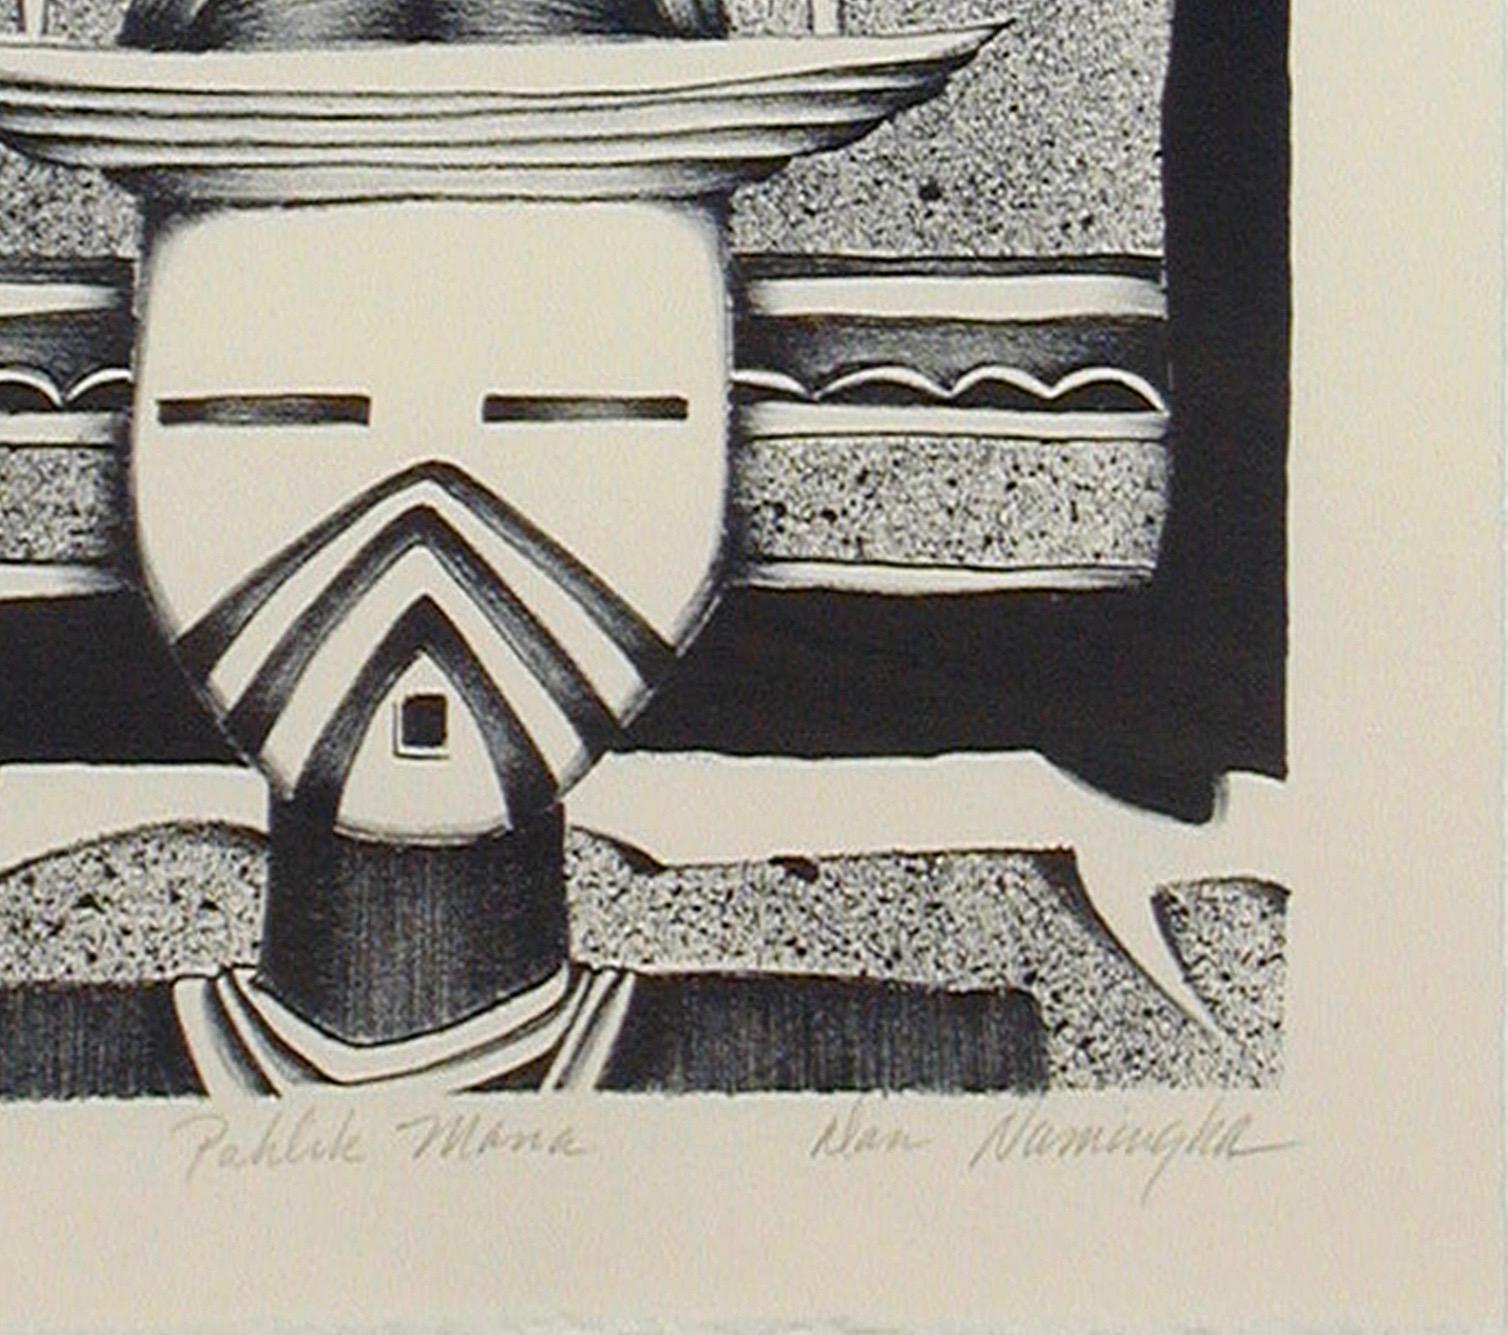 Pahlik Mana (Butterfly Maiden) Dan Namingha Hopi kachina katsina black and white

unframed limited edition hand pulled lithograph at Tamarind Institue

Glenn Green Galleries also presents paintings, prints and sculpture by Southwestern luminary, DAN